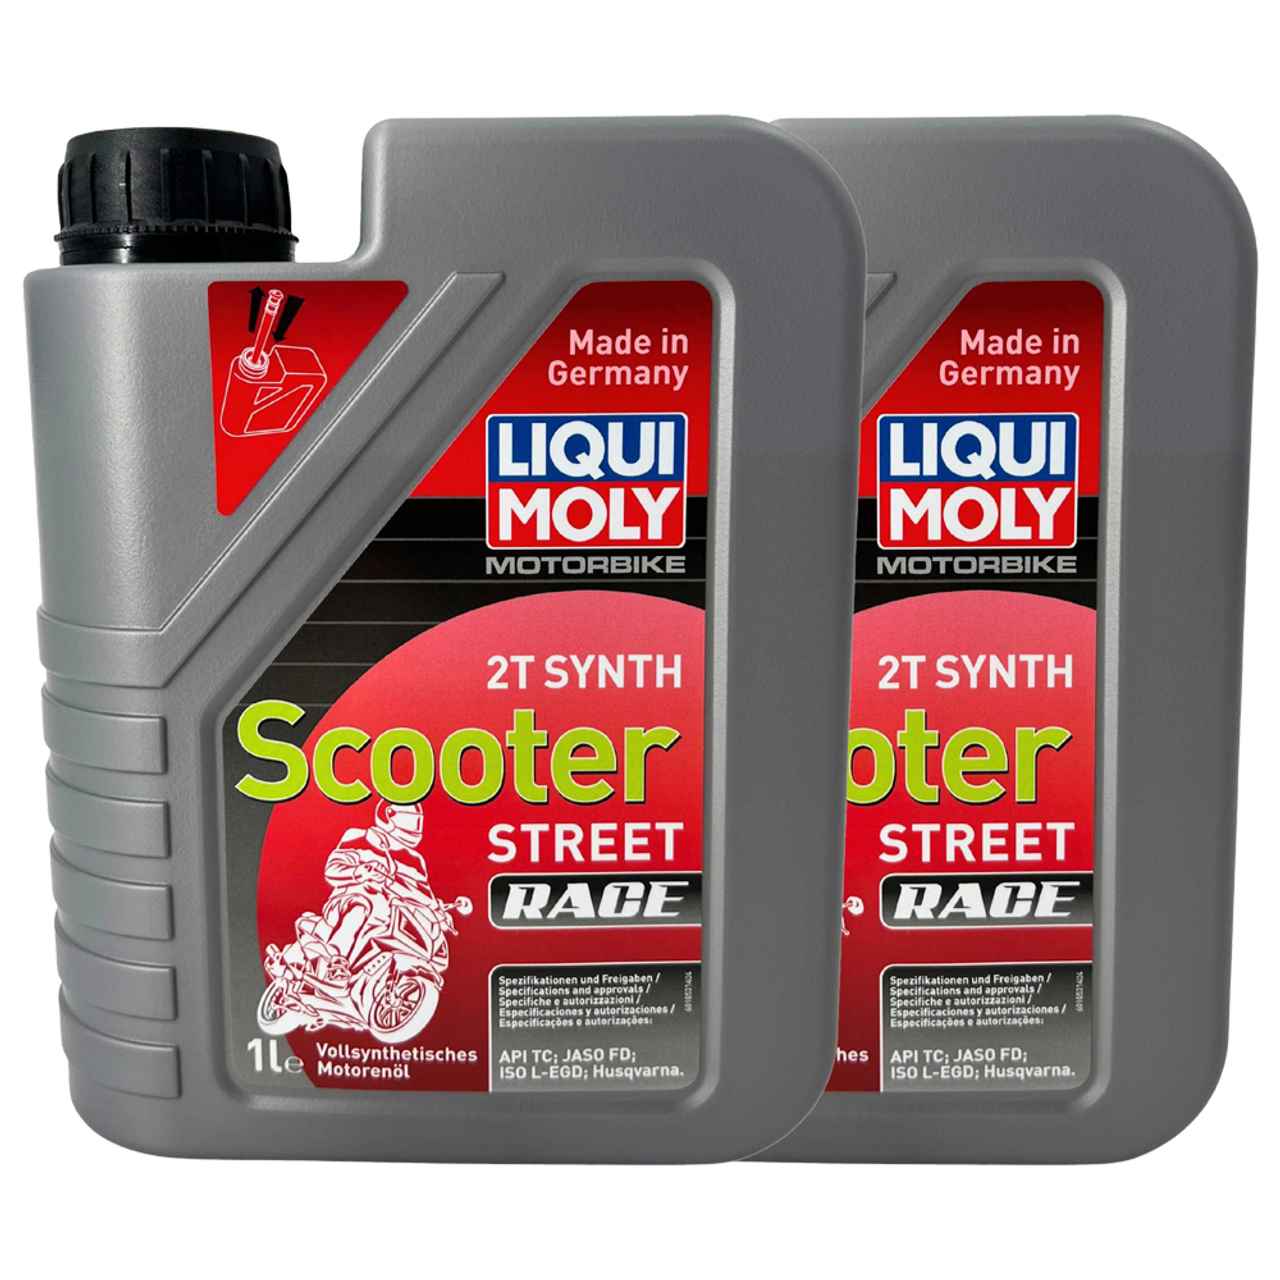 Liqui Moly Motorbike 2T Synth Scooter Race 2x1 Liter